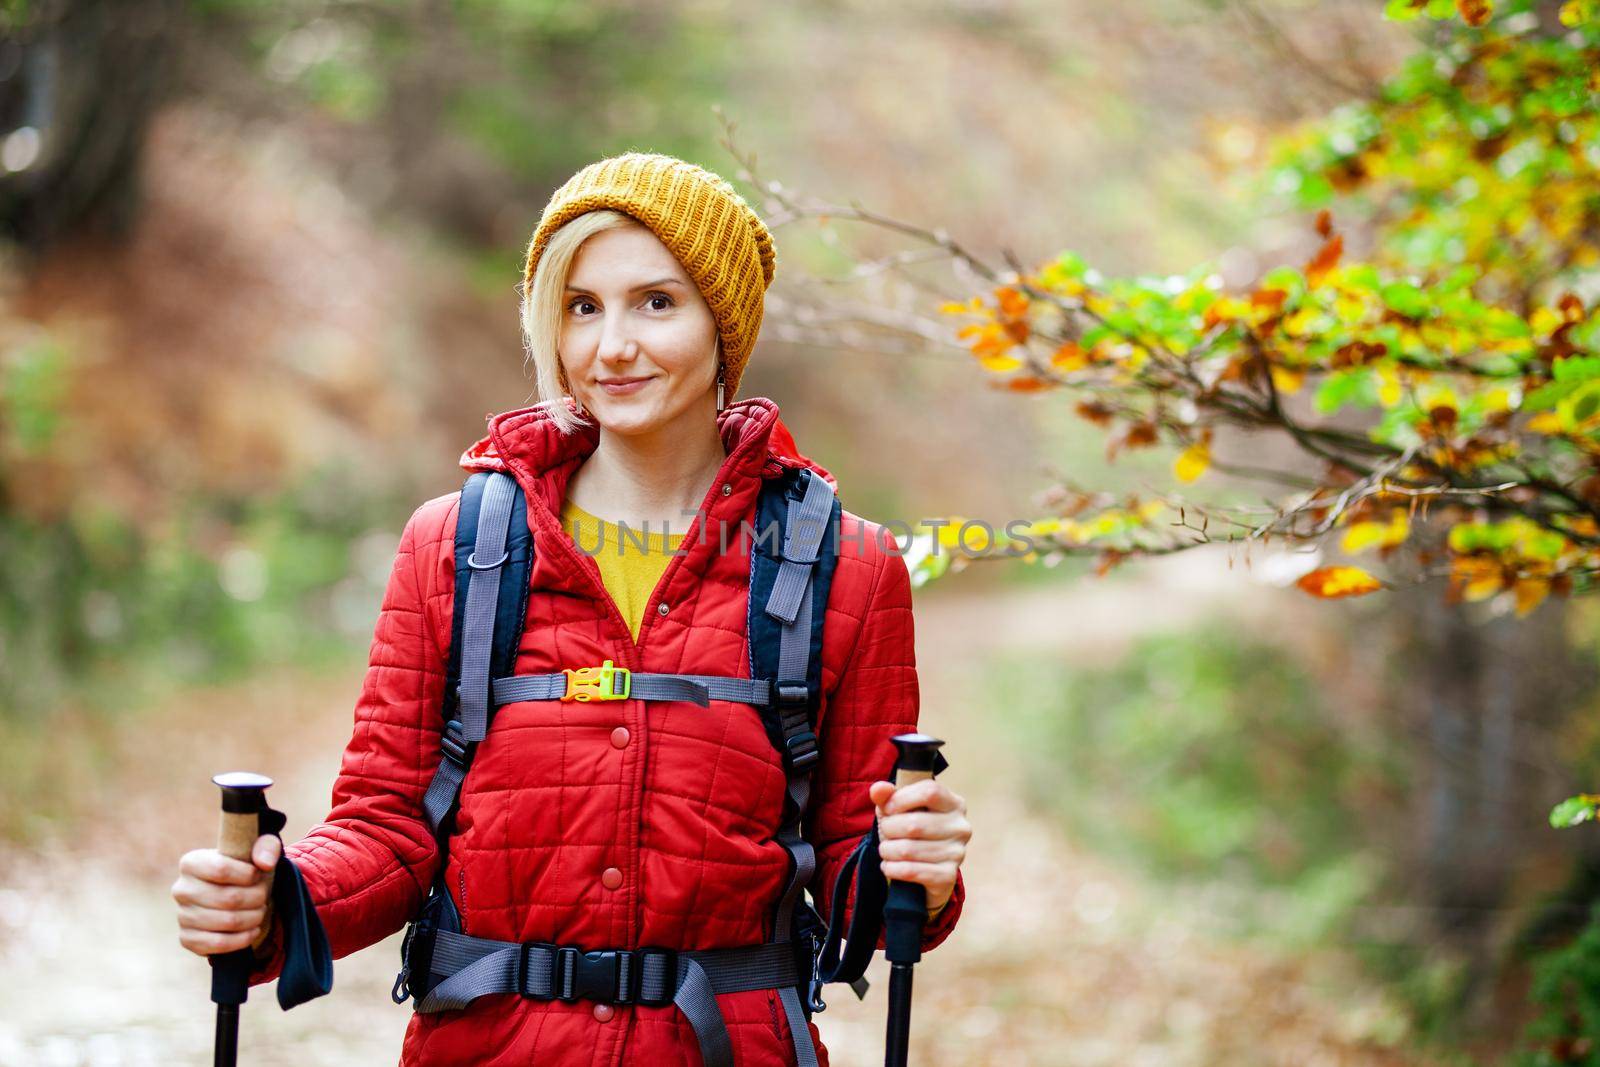 Hiking girl with poles and backpack on a trail. Looking at camera. Travel and healthy lifestyle outdoors in fall season by kokimk